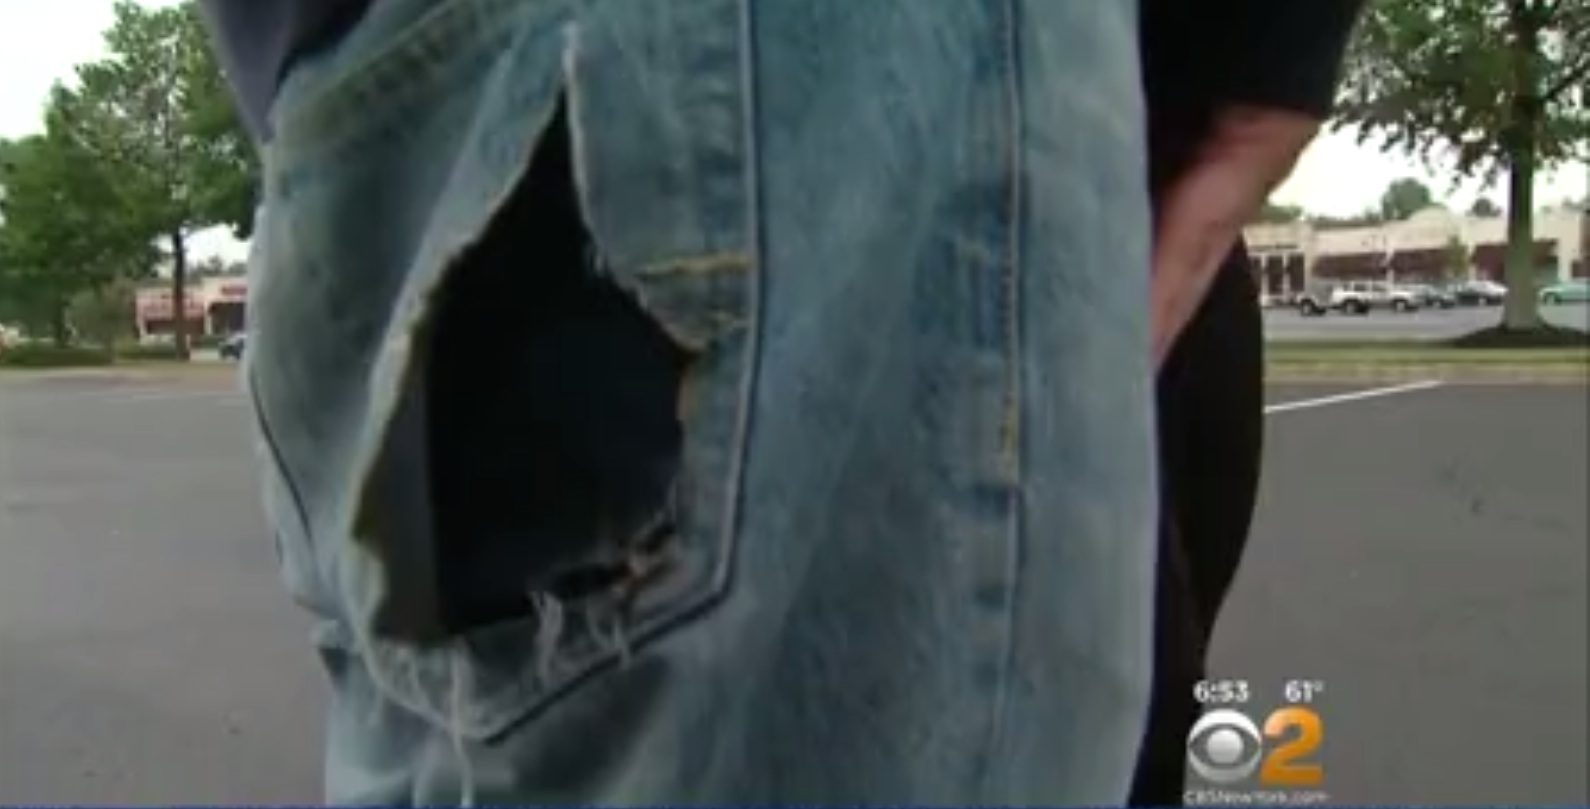 College Student Claims iPhone Caught Fire In Pocket During Class